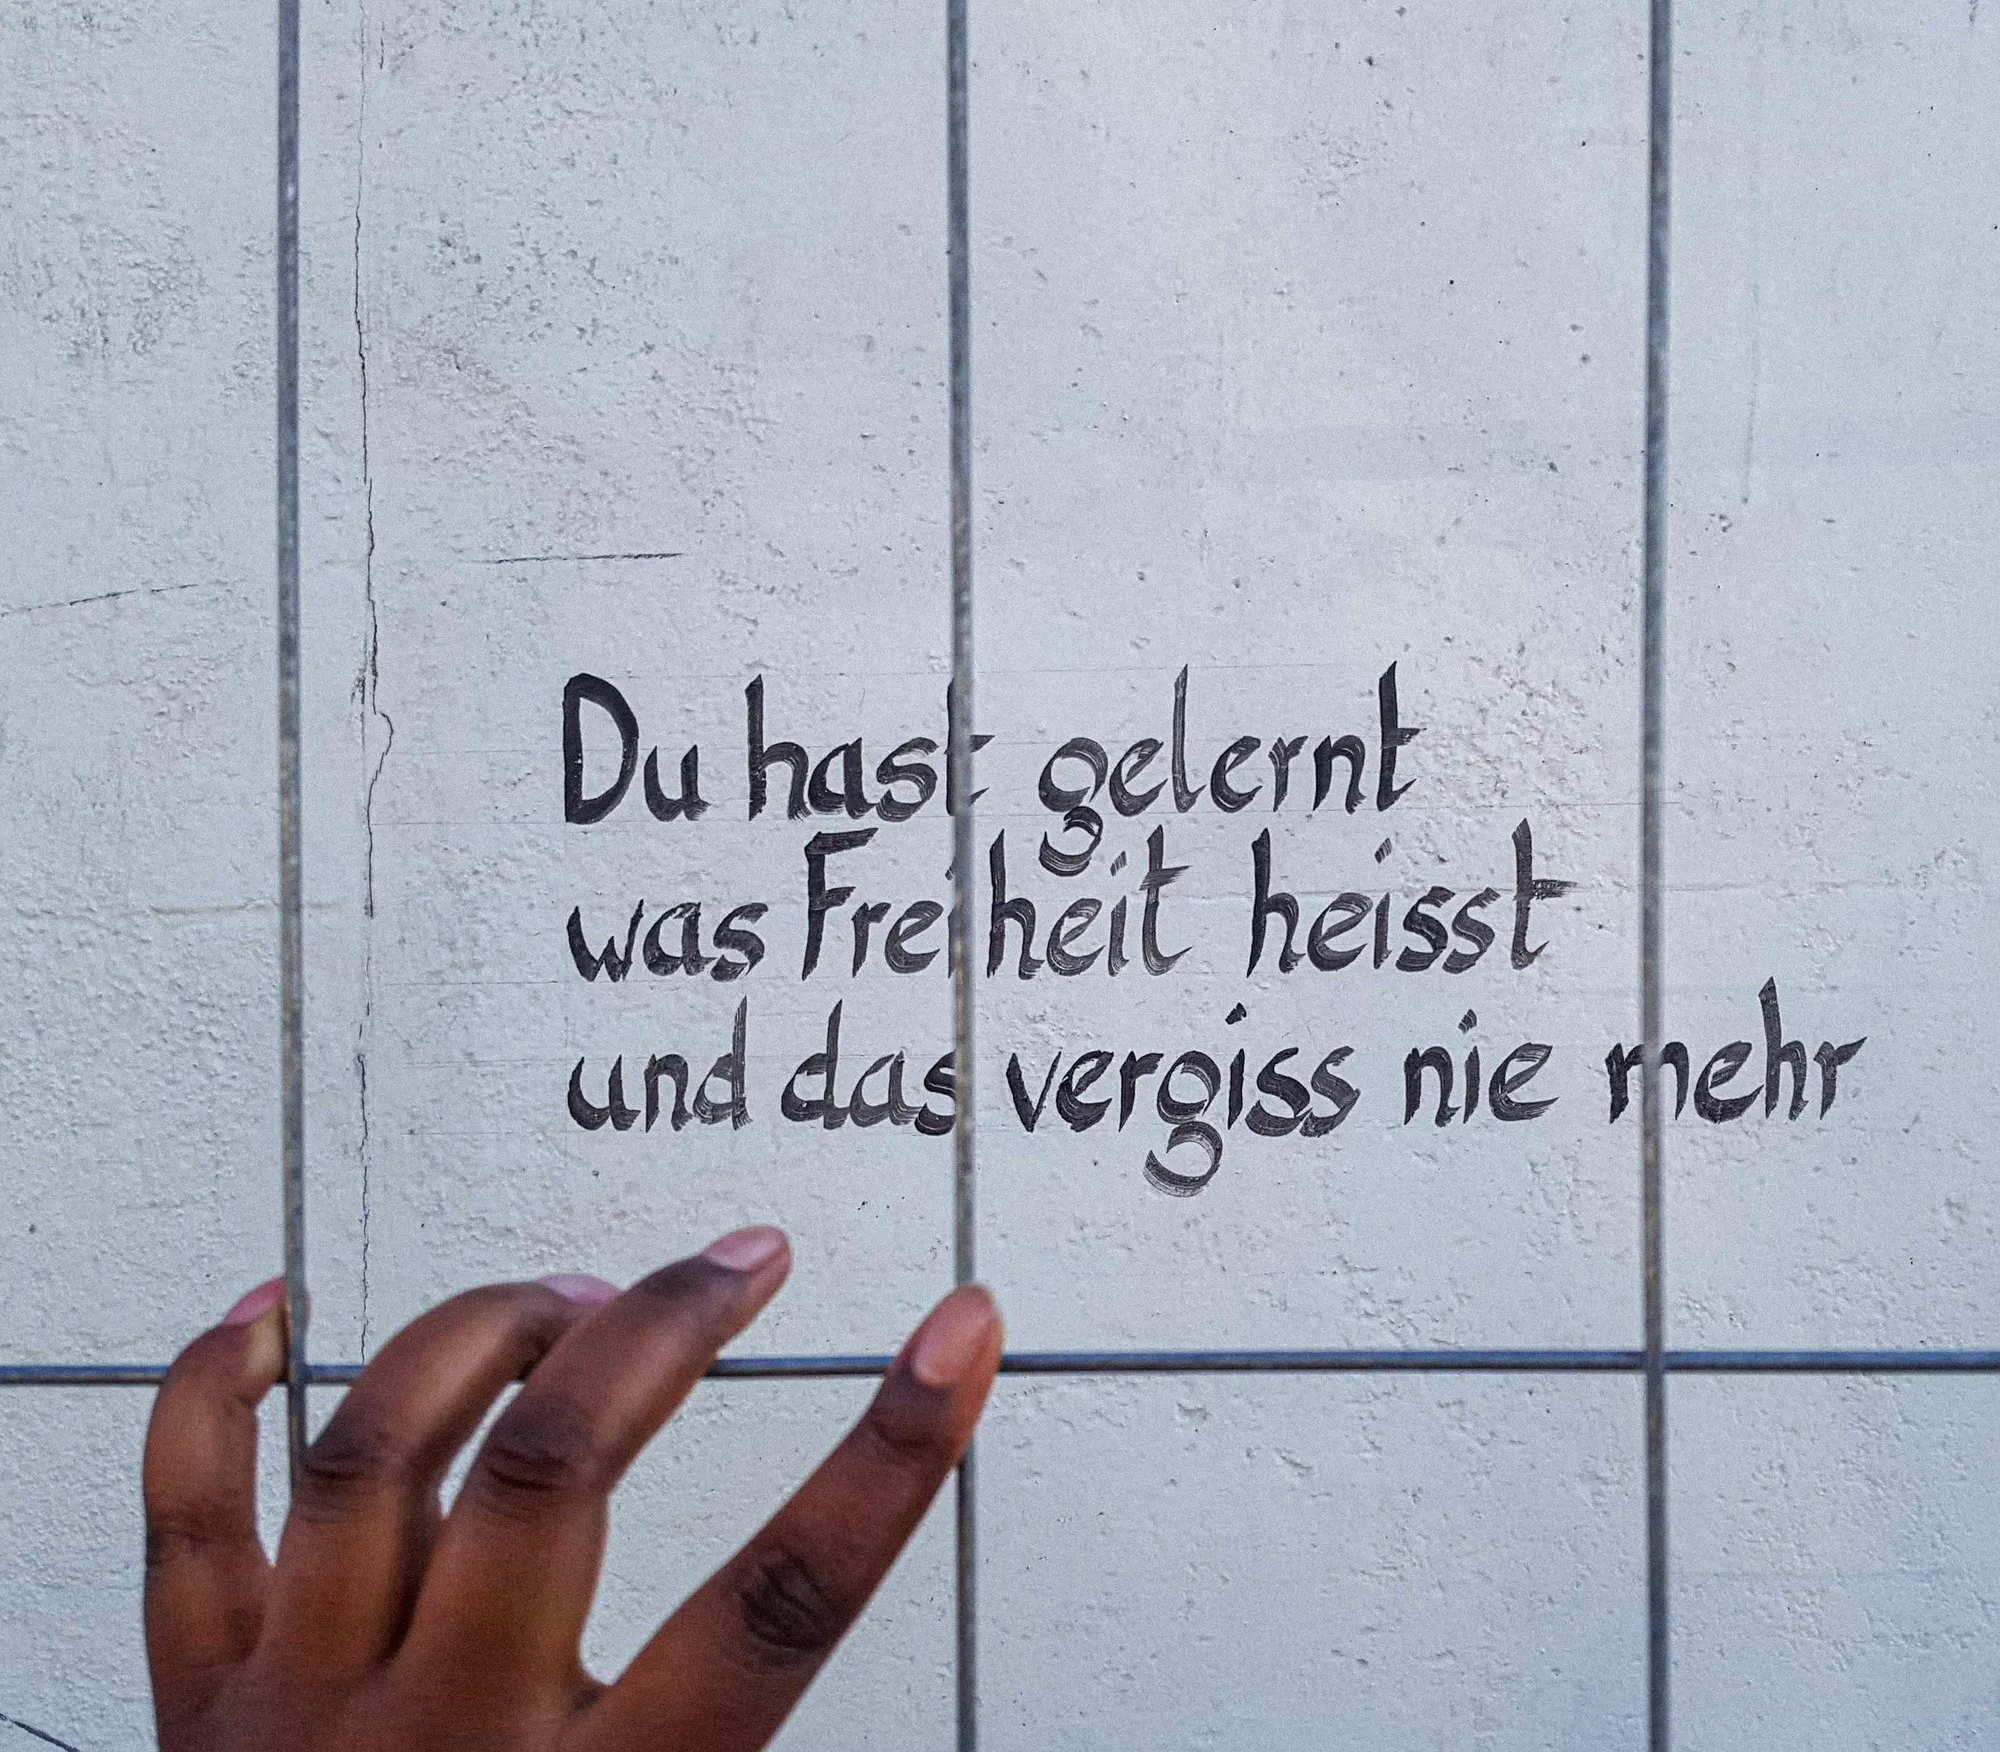 A photograph of a black woman's hand touching the fence enclosure of a concrete wall with the words "Du hast gelrnt was Freiheit heisst und das vergiss nie mehr."